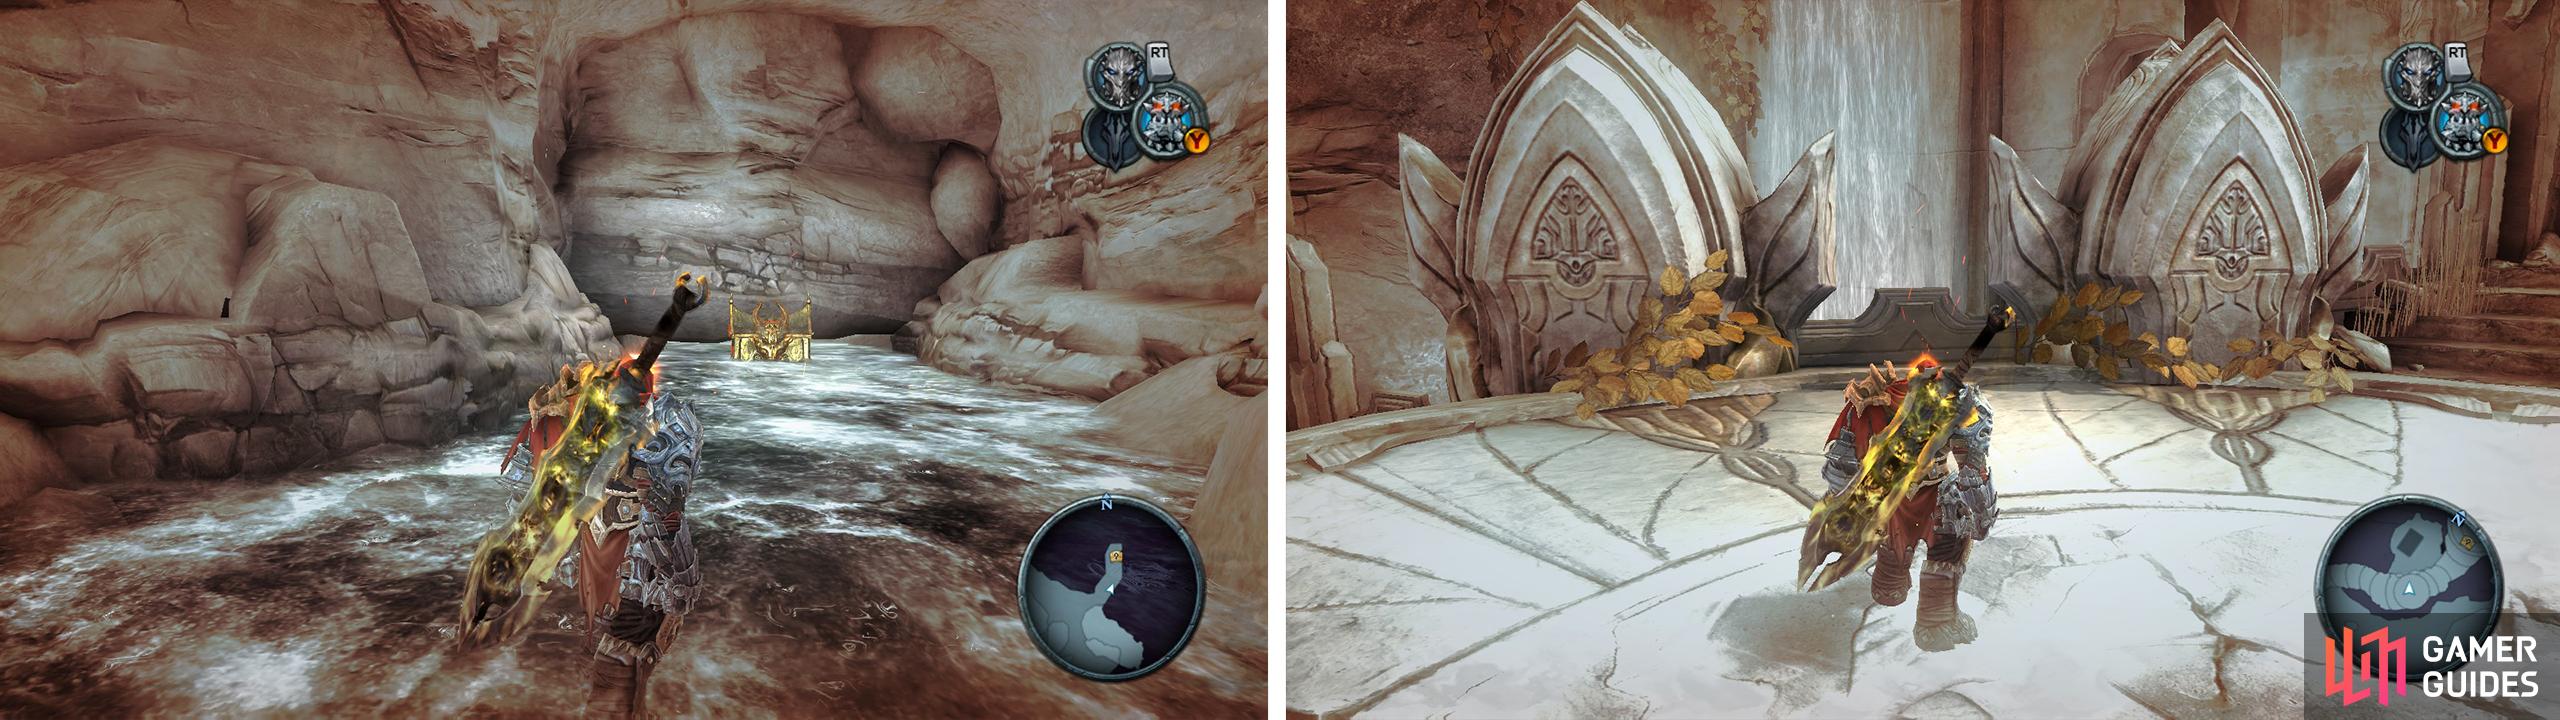 Look behind the waterfall for a piece of Abyssal Armour (left). Climb the stairs and hop the wall here (right) to find a Wrath Shard.